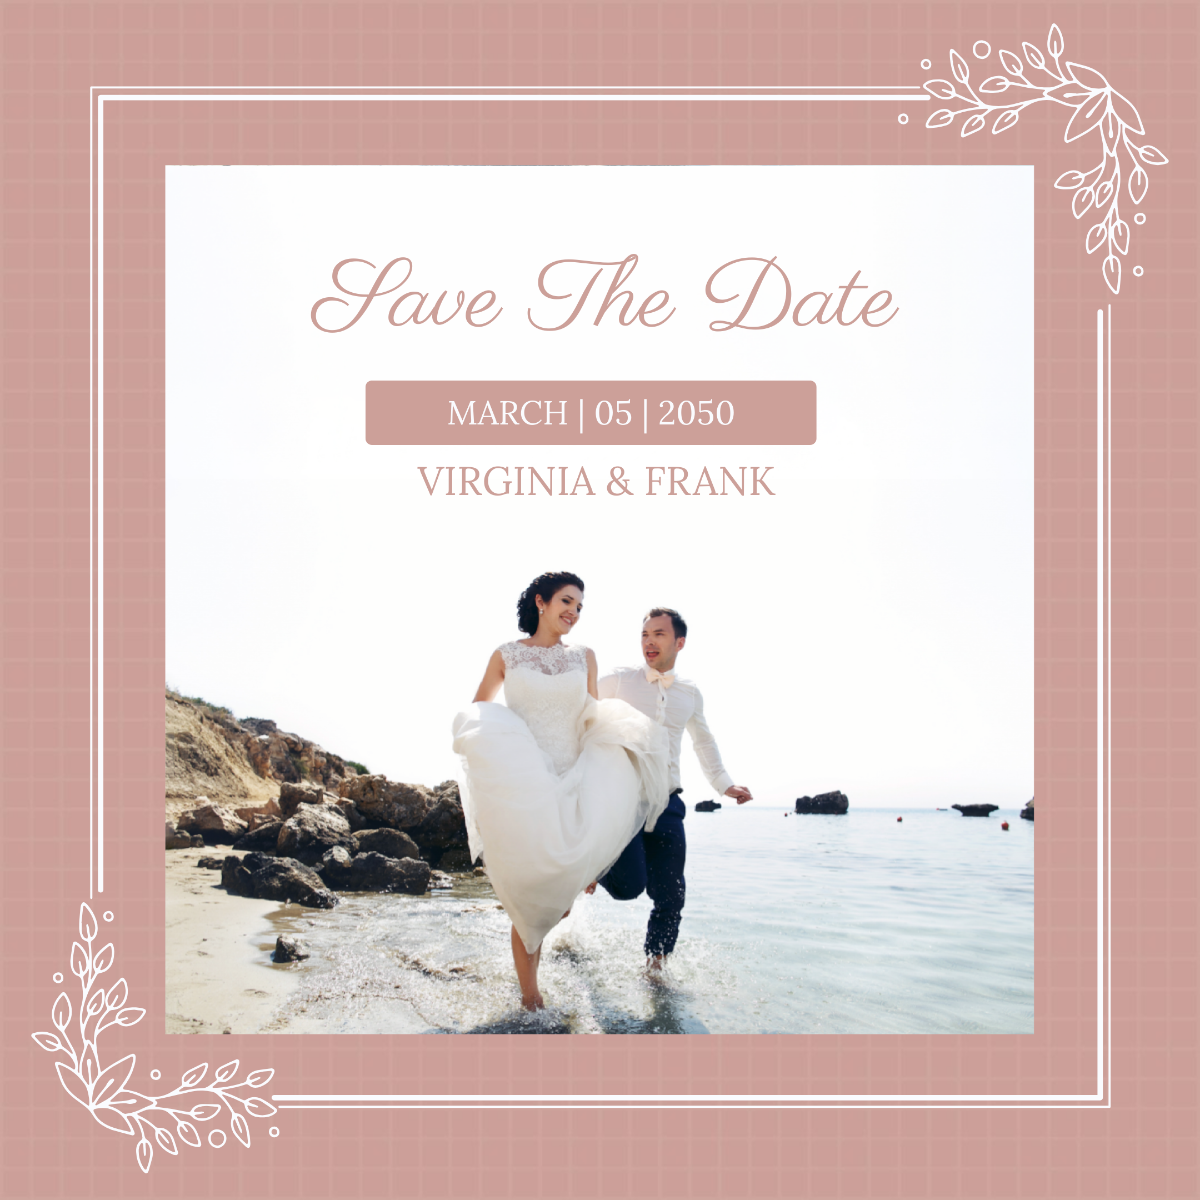 Save The Date Instagram Banner